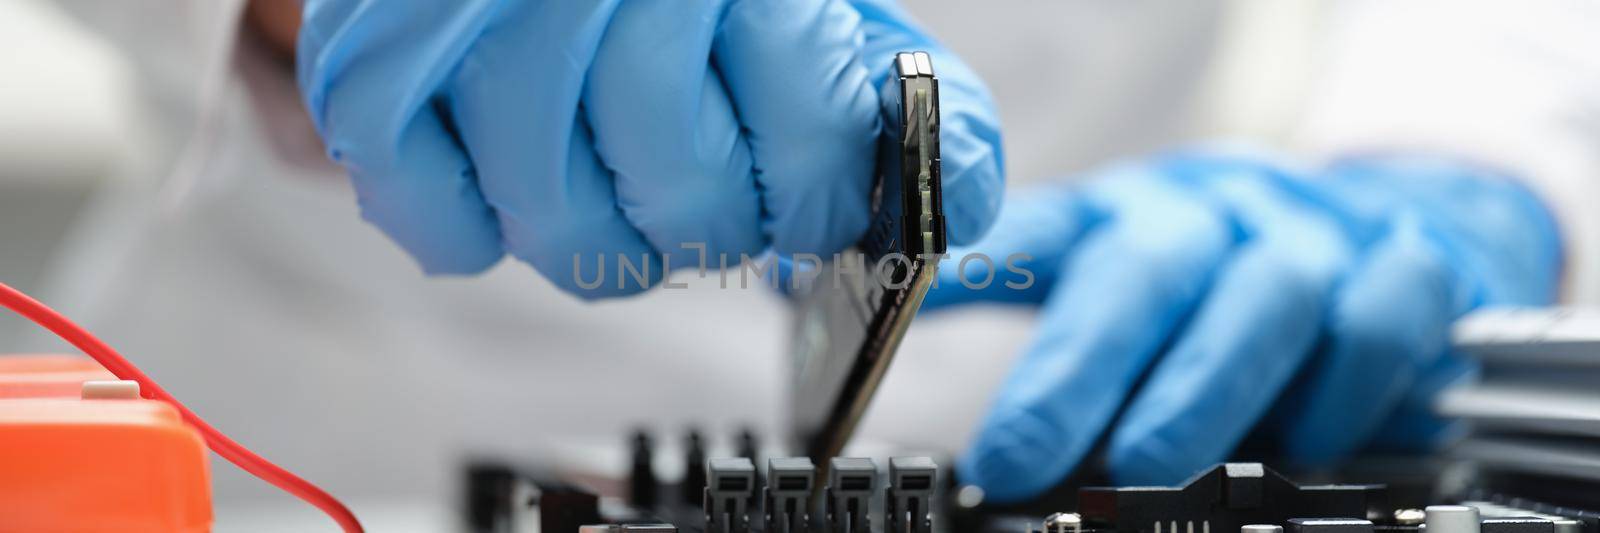 A man in production inserts a microcircuit into a device by kuprevich